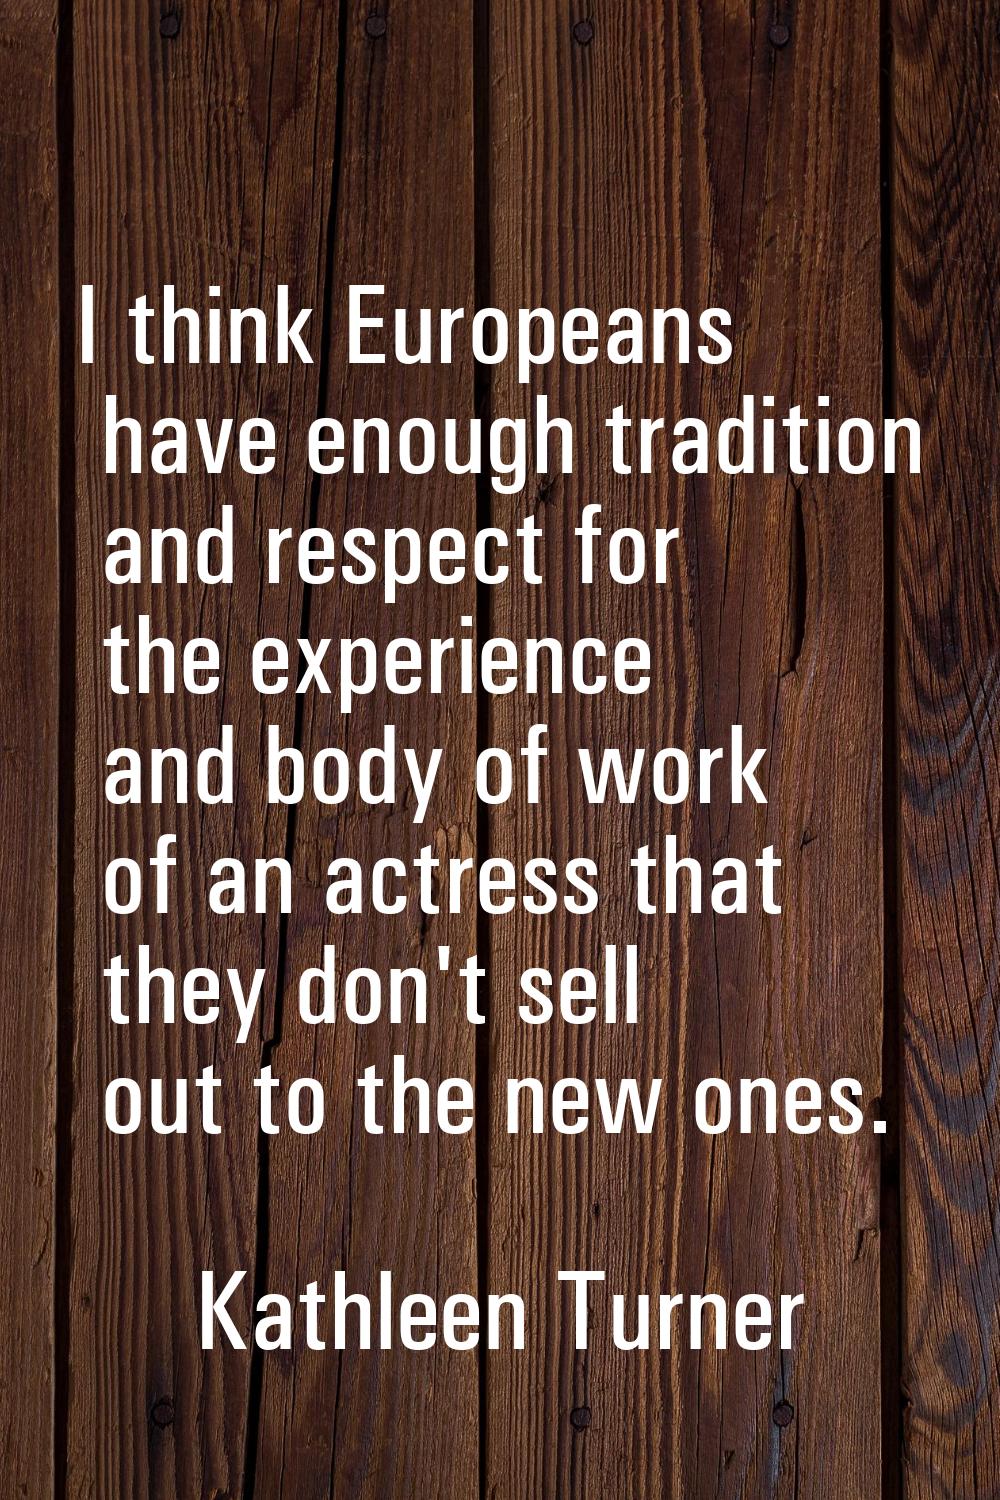 I think Europeans have enough tradition and respect for the experience and body of work of an actre